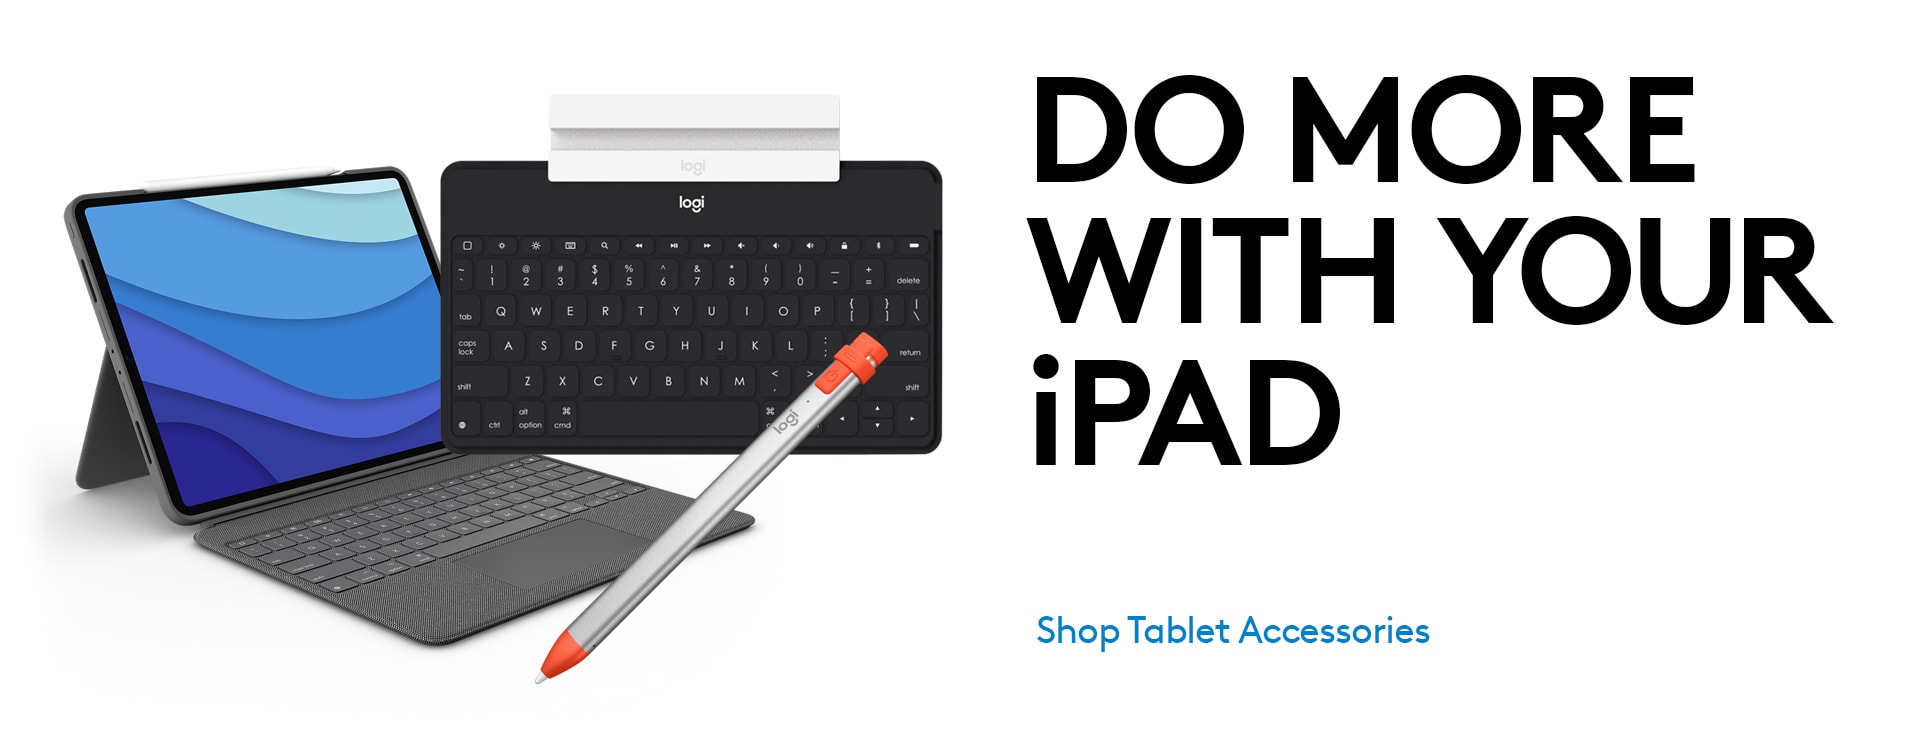 Do more with your iPad